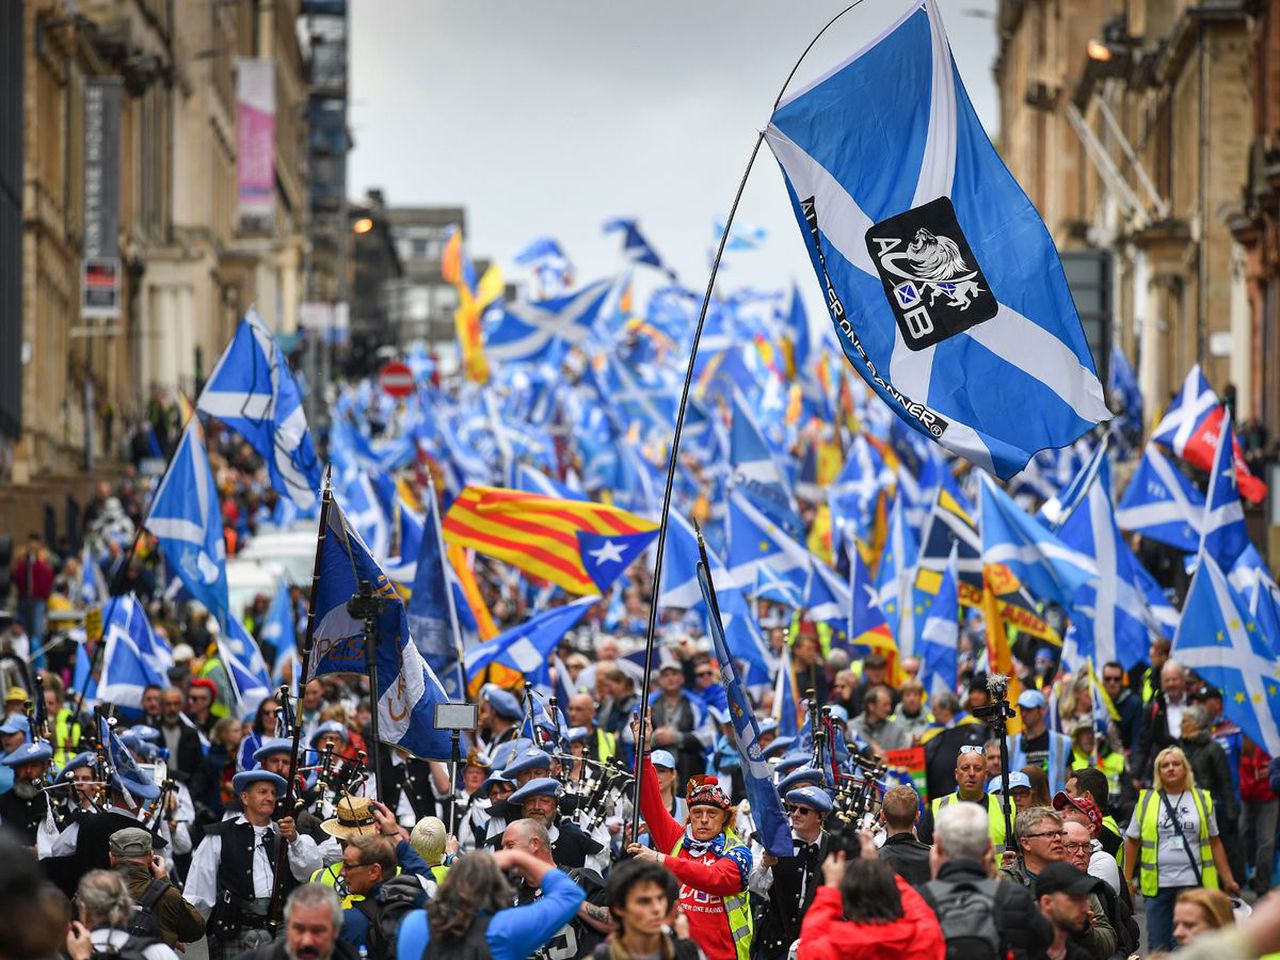 Scottish independence movement to picks up steam ahead of Brexit. Image via Daily Record.